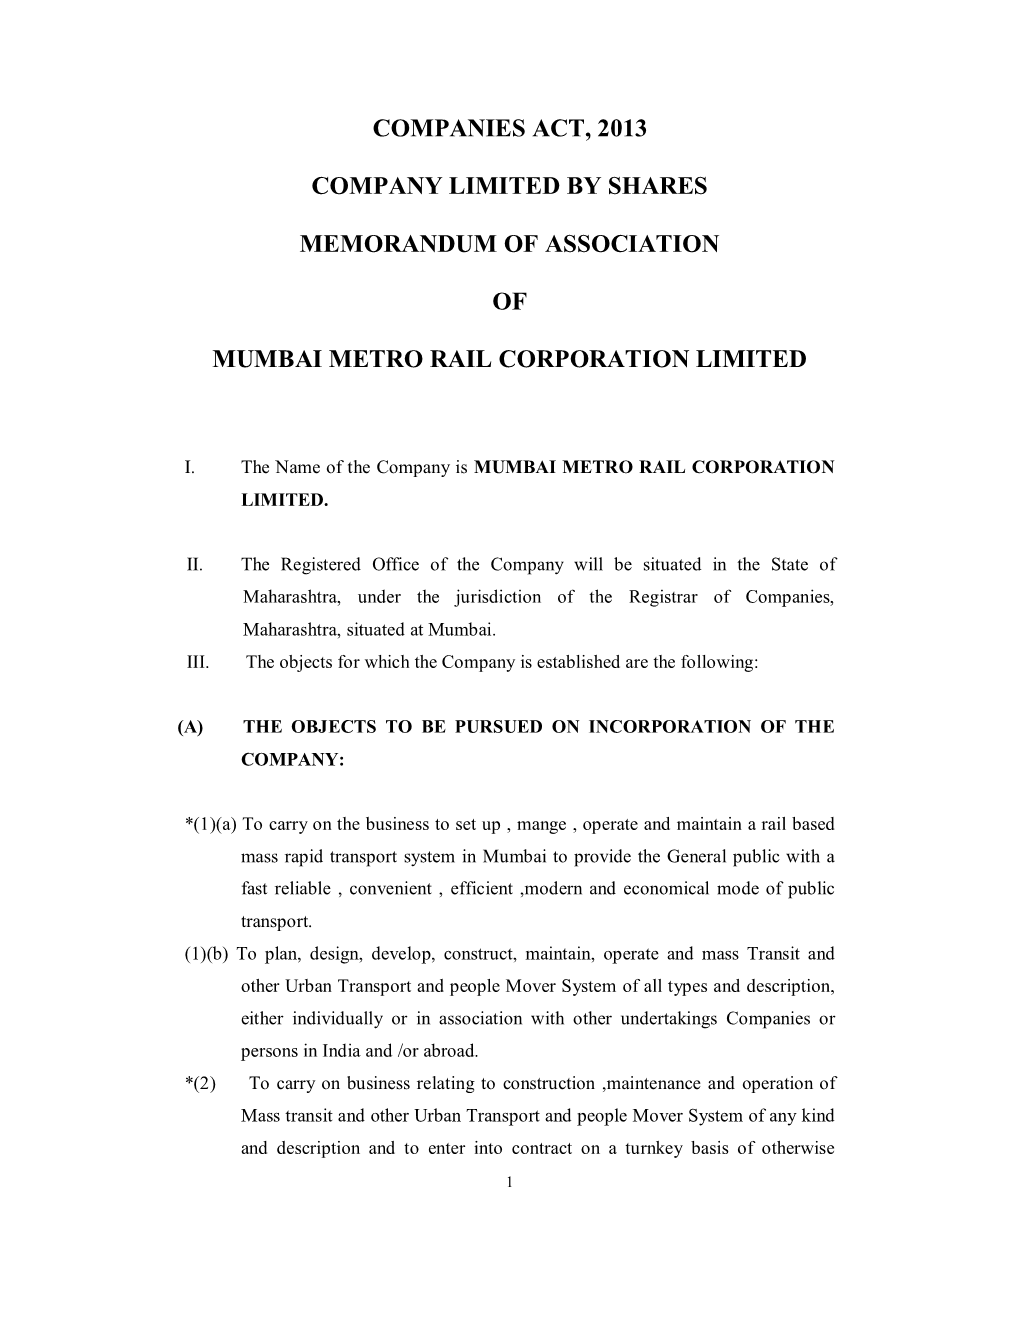 Companies Act, 2013 Company Limited by Shares